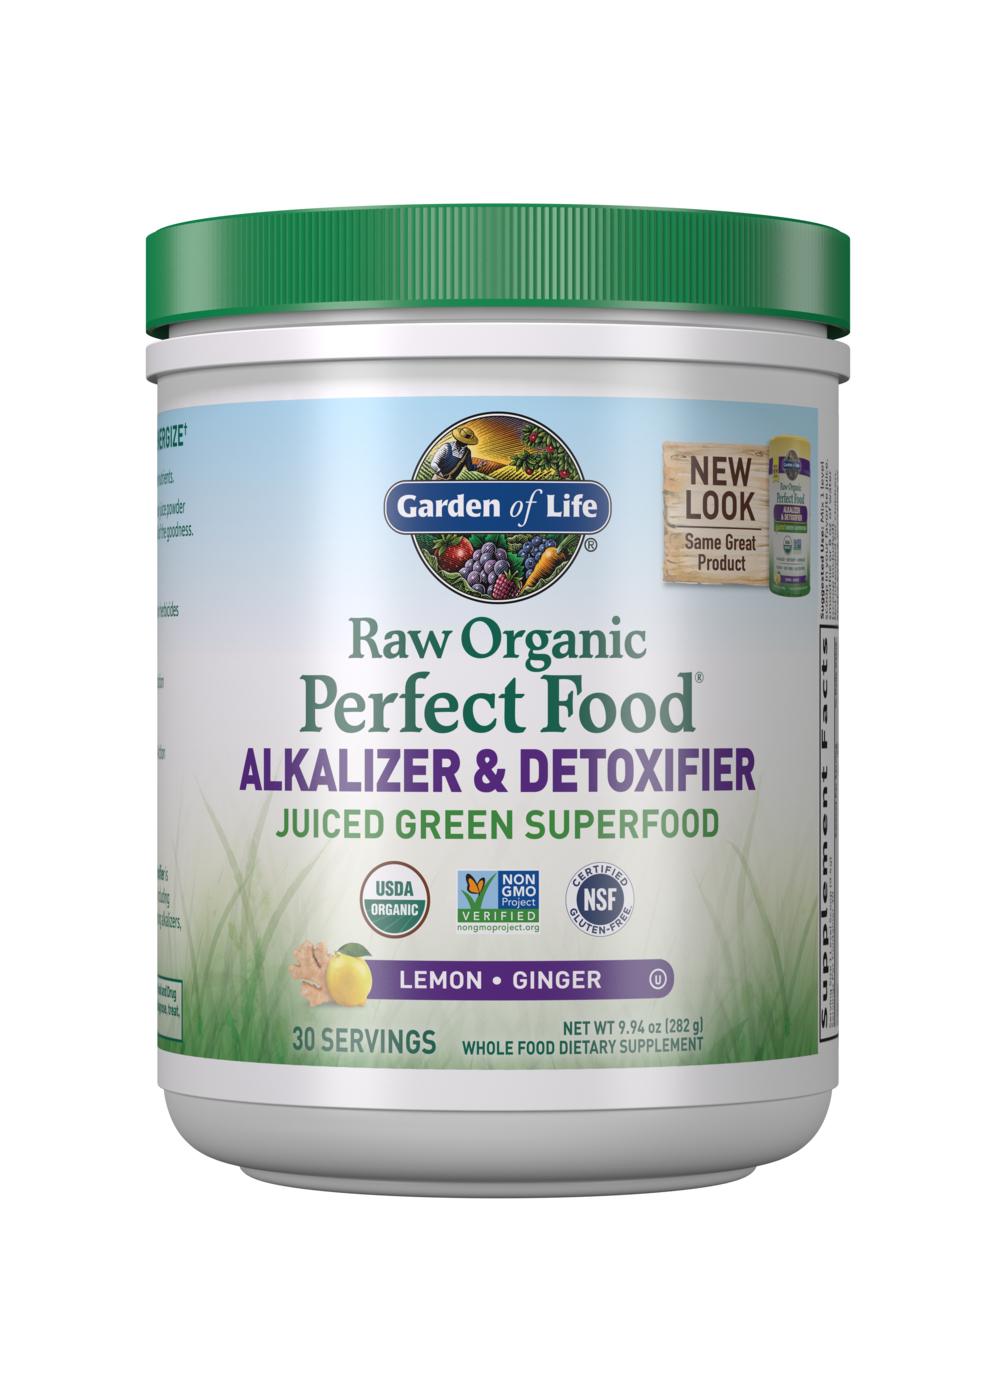 Garden of Life Raw Organic Perfect Food Alkalizer & Detoxifier Juiced Green Superfood; image 1 of 2